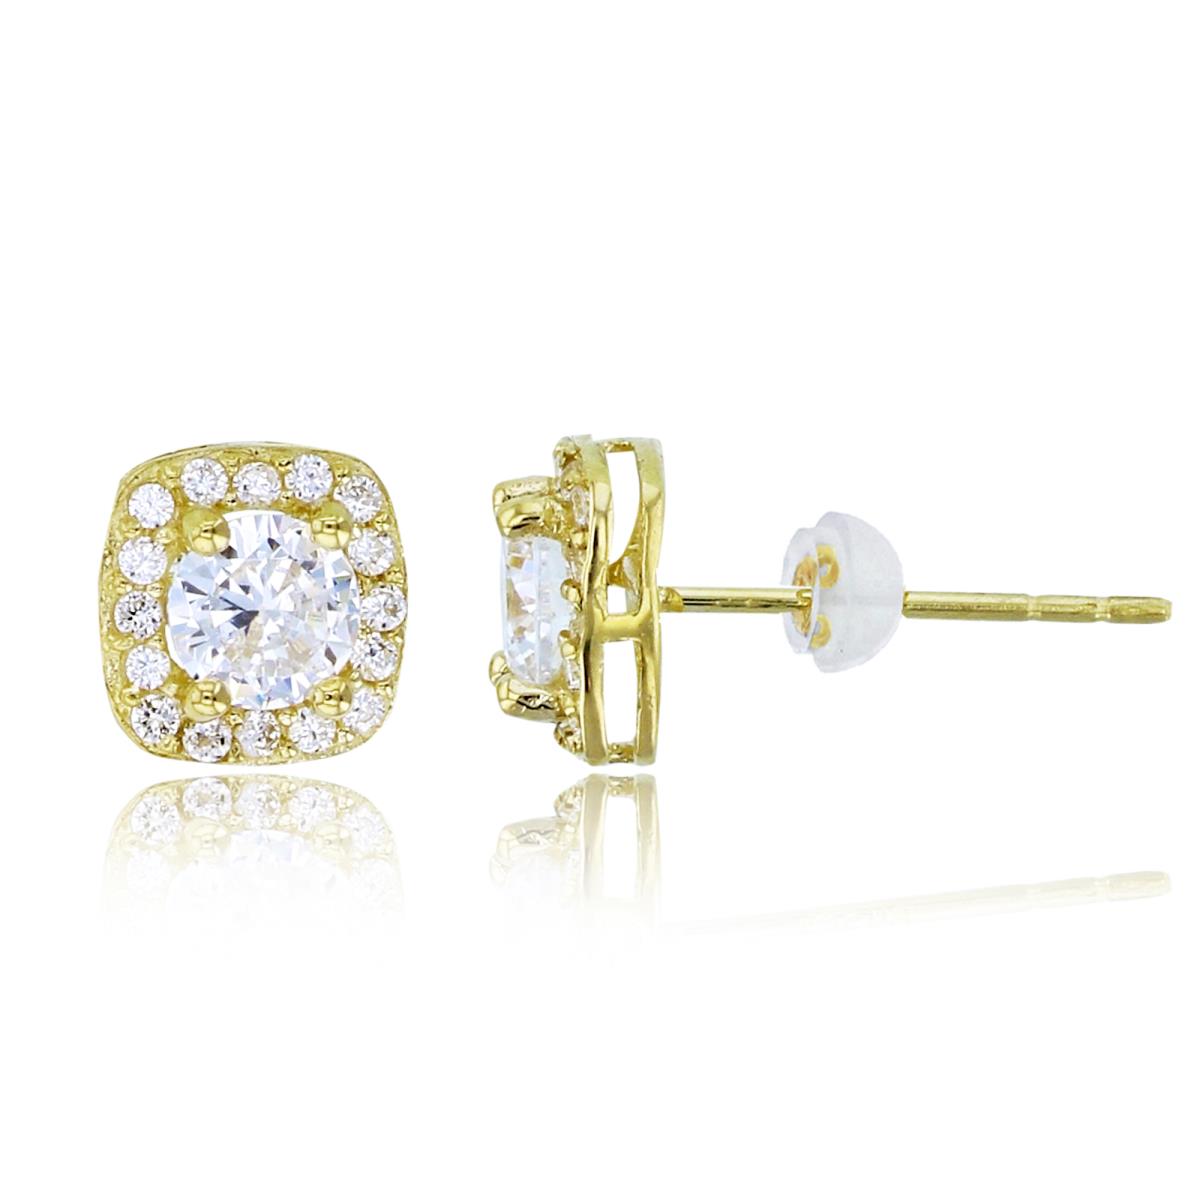 10K Yellow Gold 4mm Rnd CZ Halo Cushion Studs with Silicon Backs